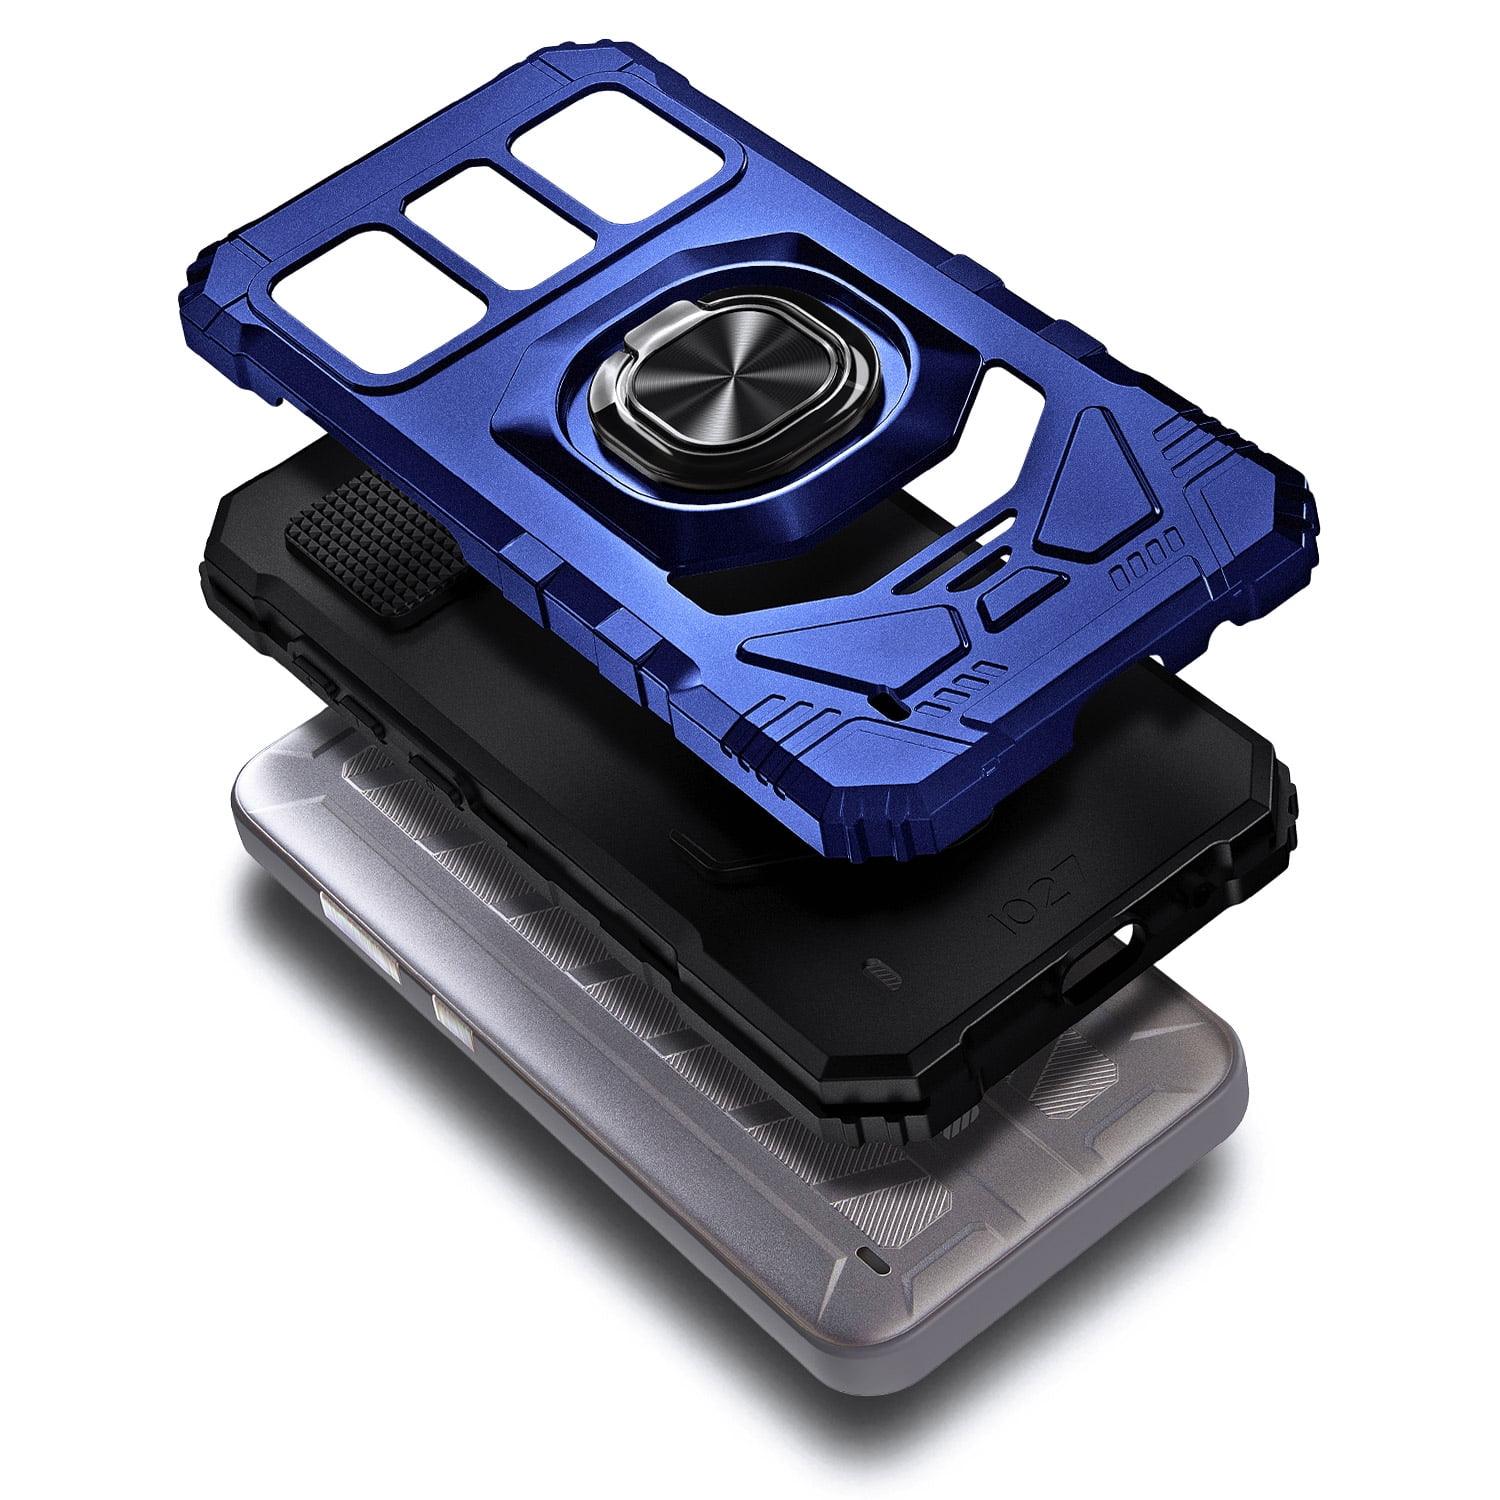  Chooee 4D Silicone Protective Cover case for Garmin Edge 530  with Screen Protector Blue : Electronics